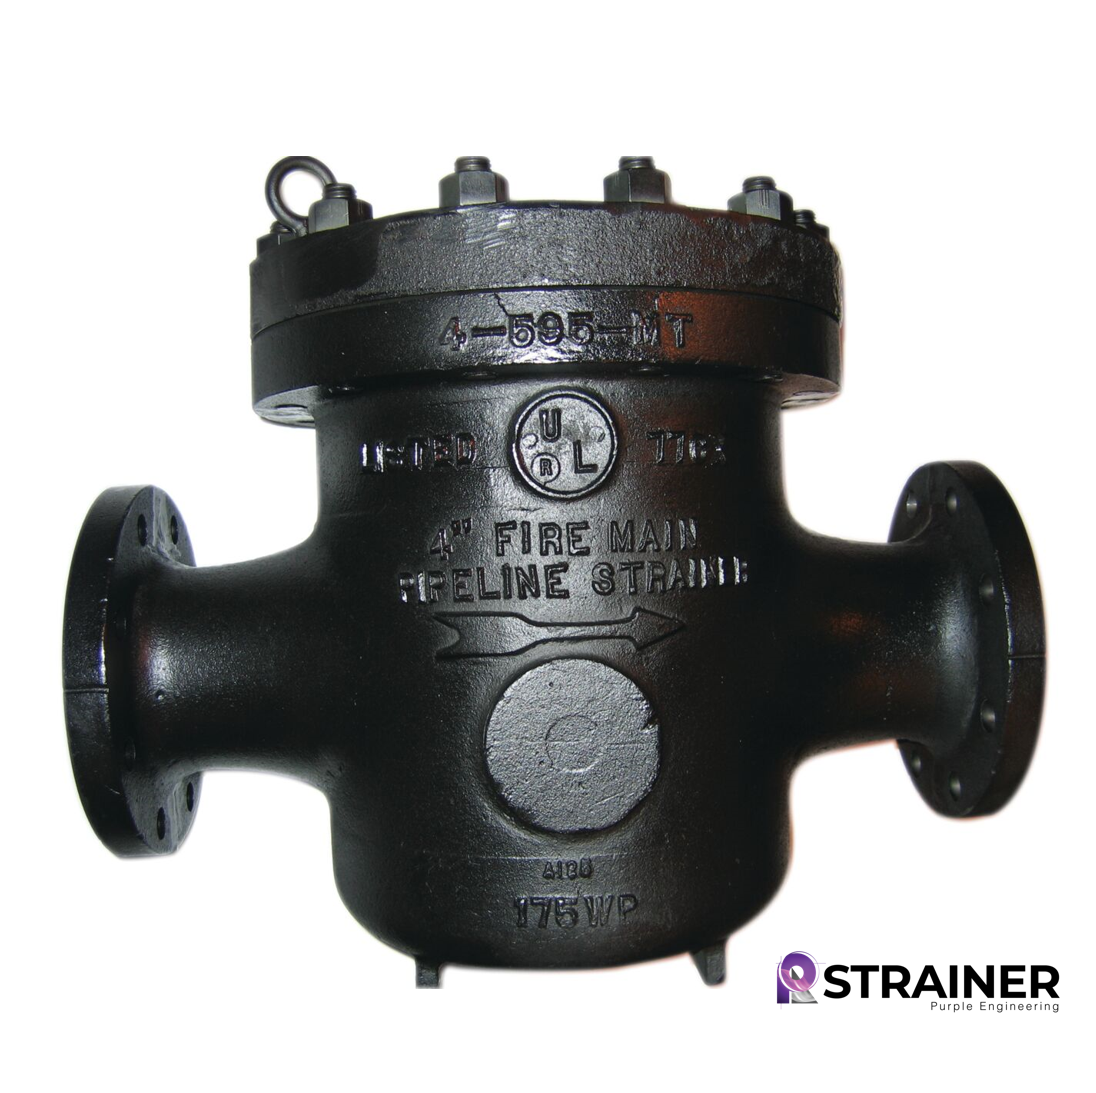 Strainer-595+4+in